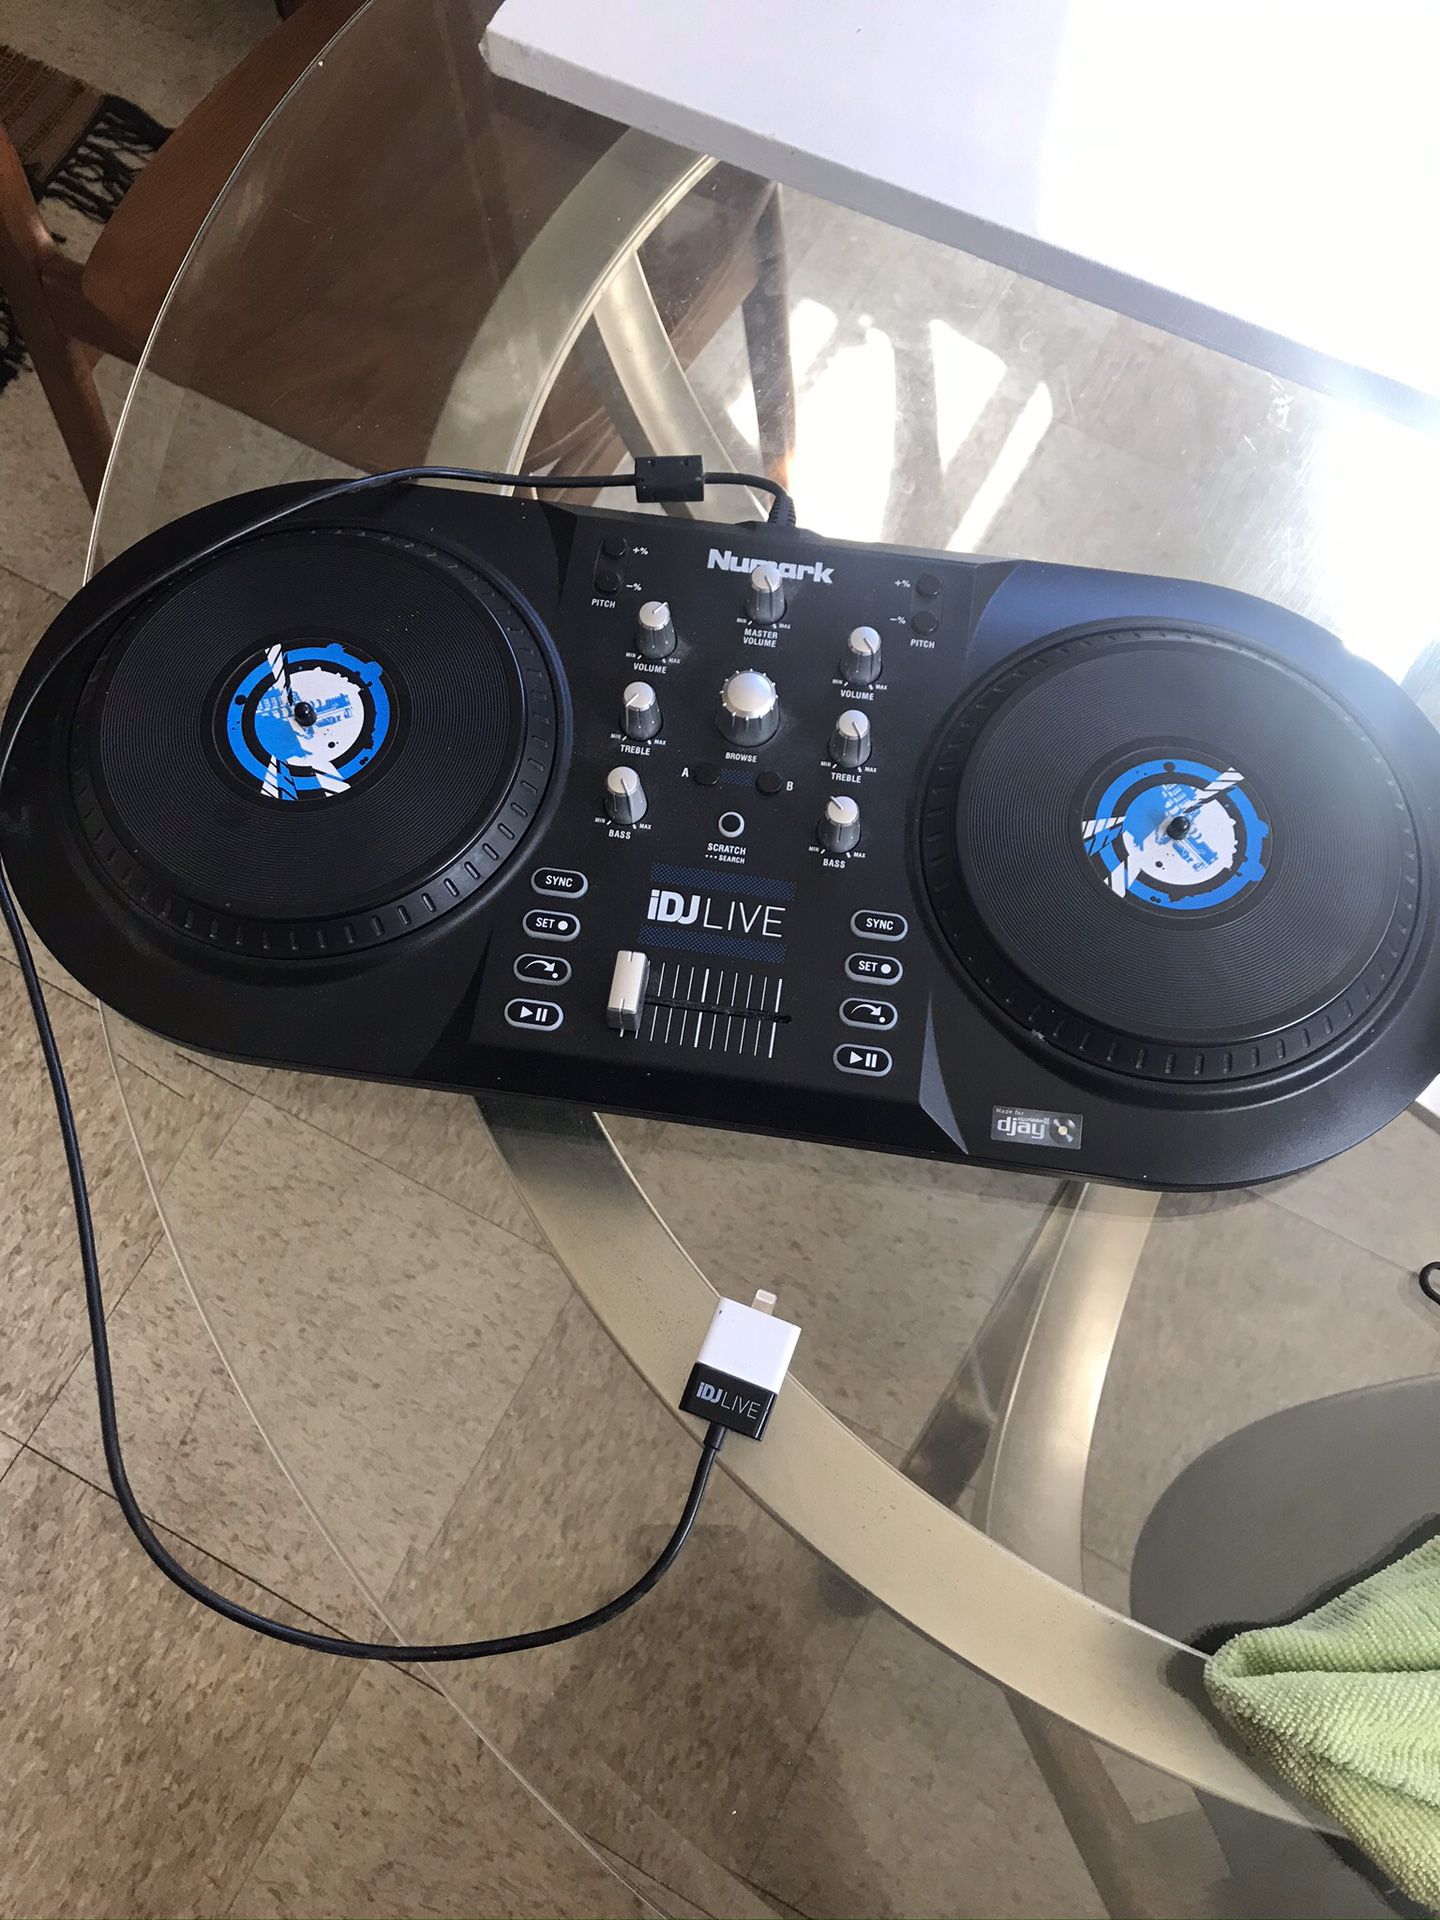 DJ turntable with iPhone attachment